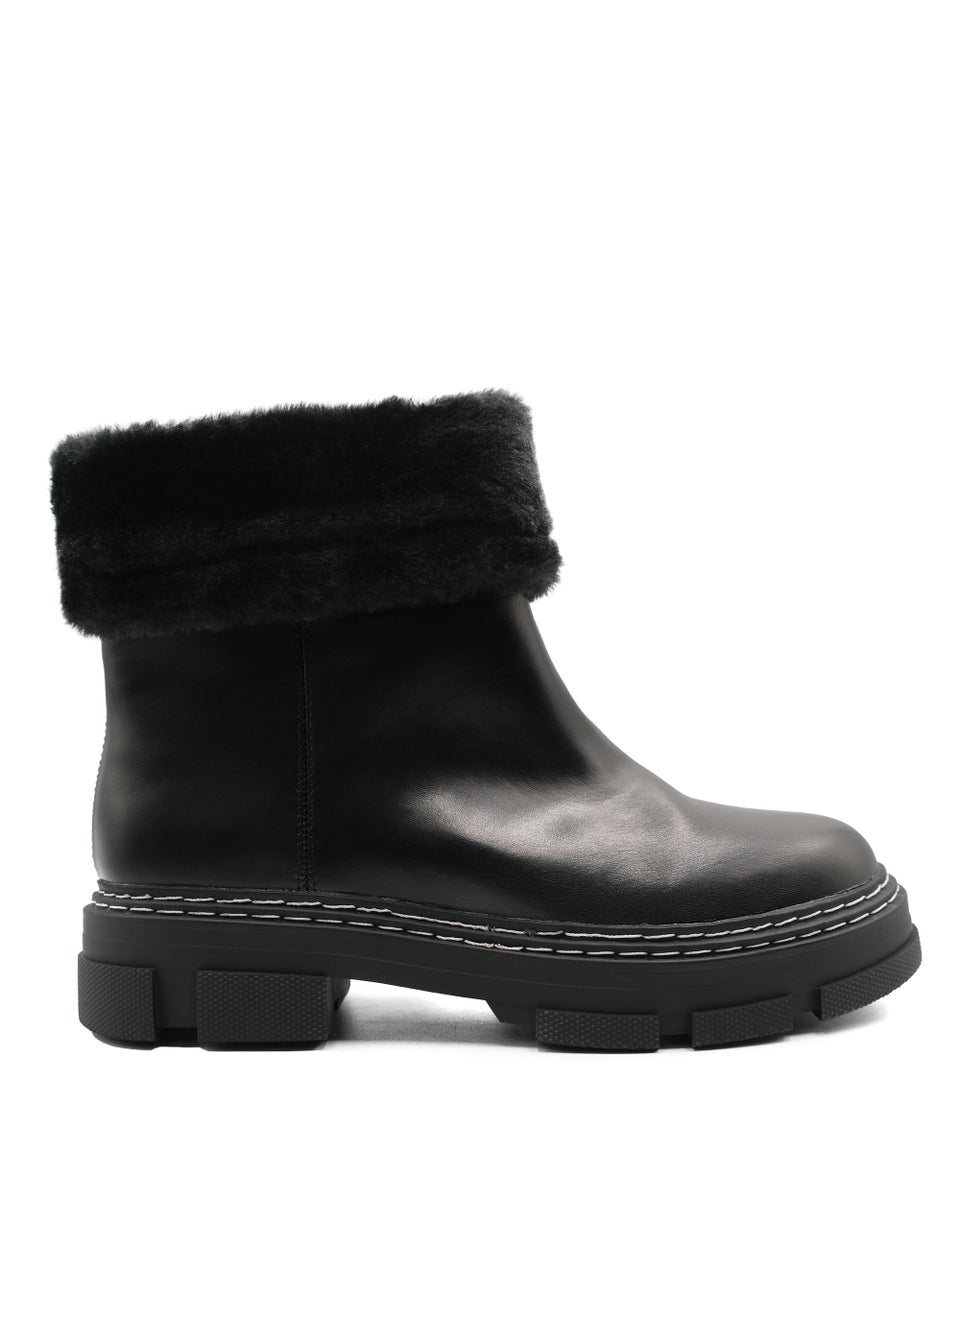 Where's That From Black Margot Platform Fur Lined Chelsea Boots